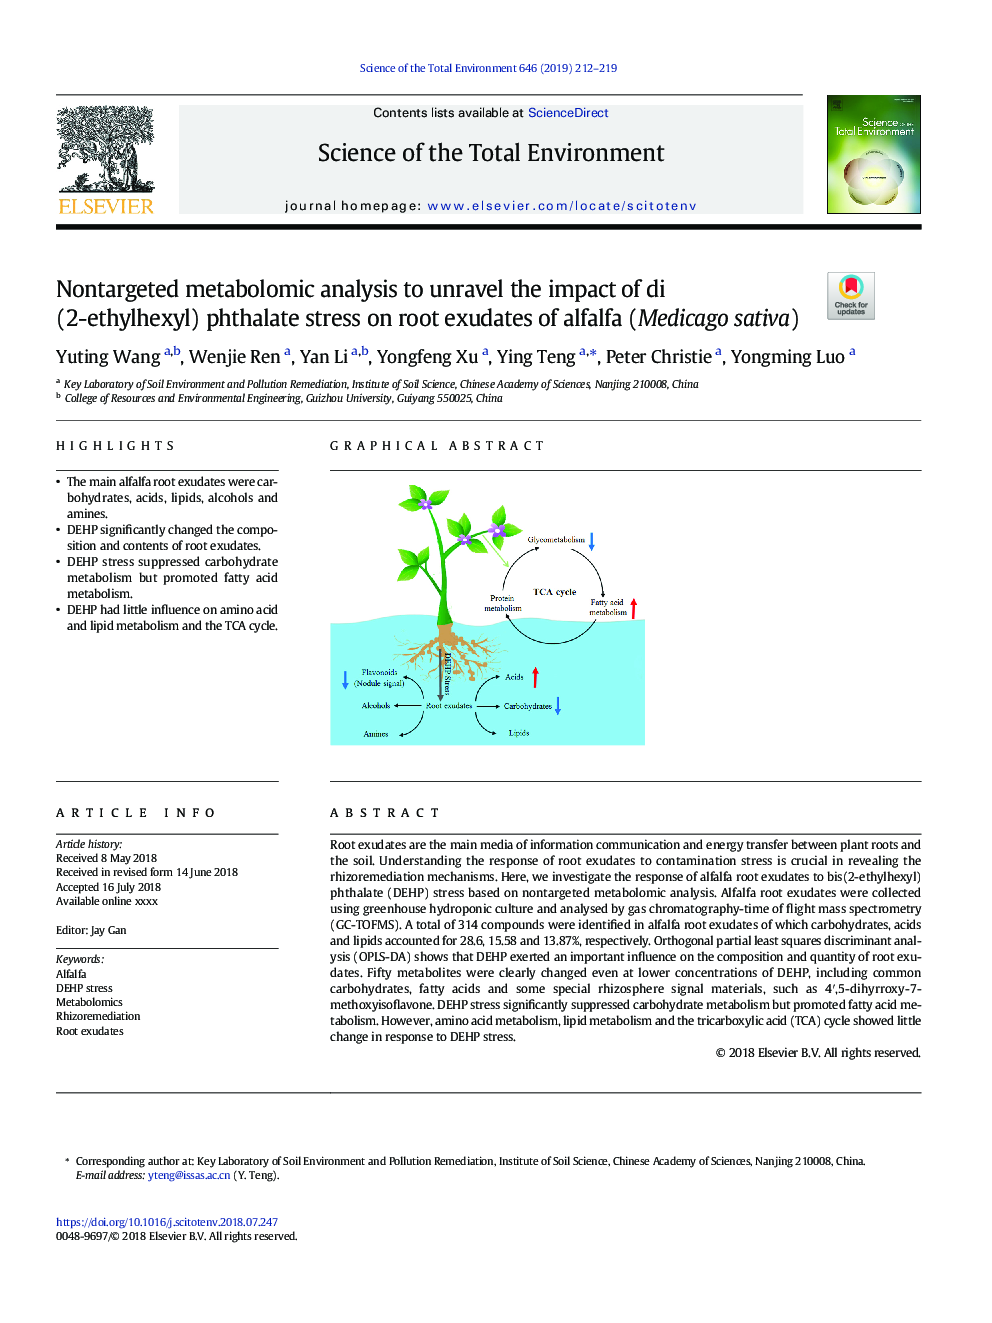 Nontargeted metabolomic analysis to unravel the impact of di (2-ethylhexyl) phthalate stress on root exudates of alfalfa (Medicago sativa)